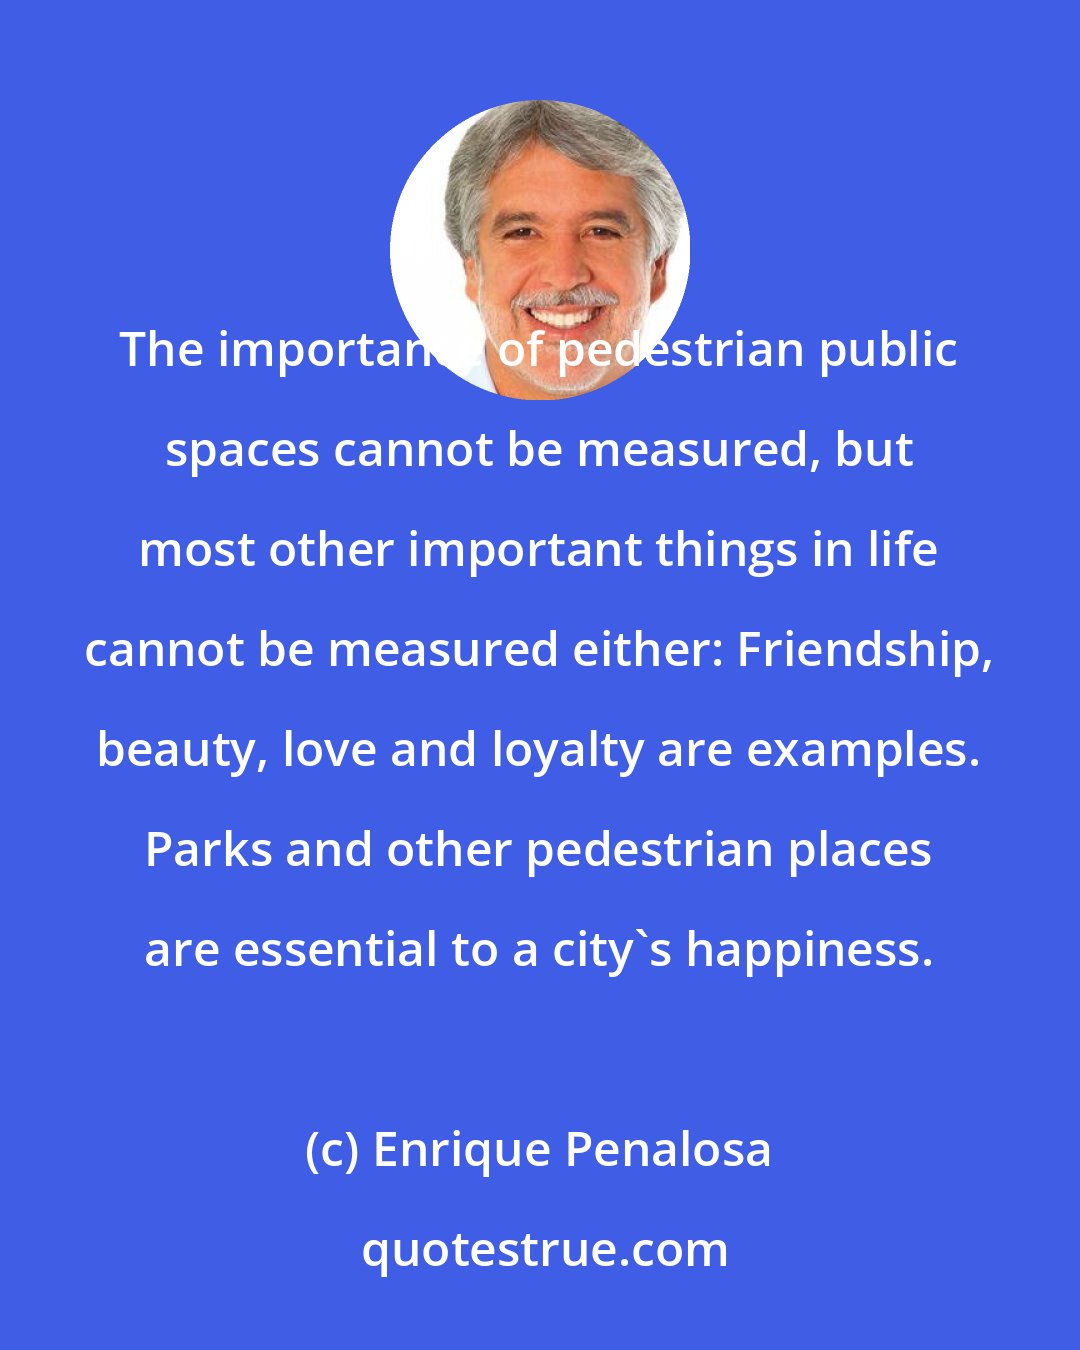 Enrique Penalosa: The importance of pedestrian public spaces cannot be measured, but most other important things in life cannot be measured either: Friendship, beauty, love and loyalty are examples. Parks and other pedestrian places are essential to a city's happiness.